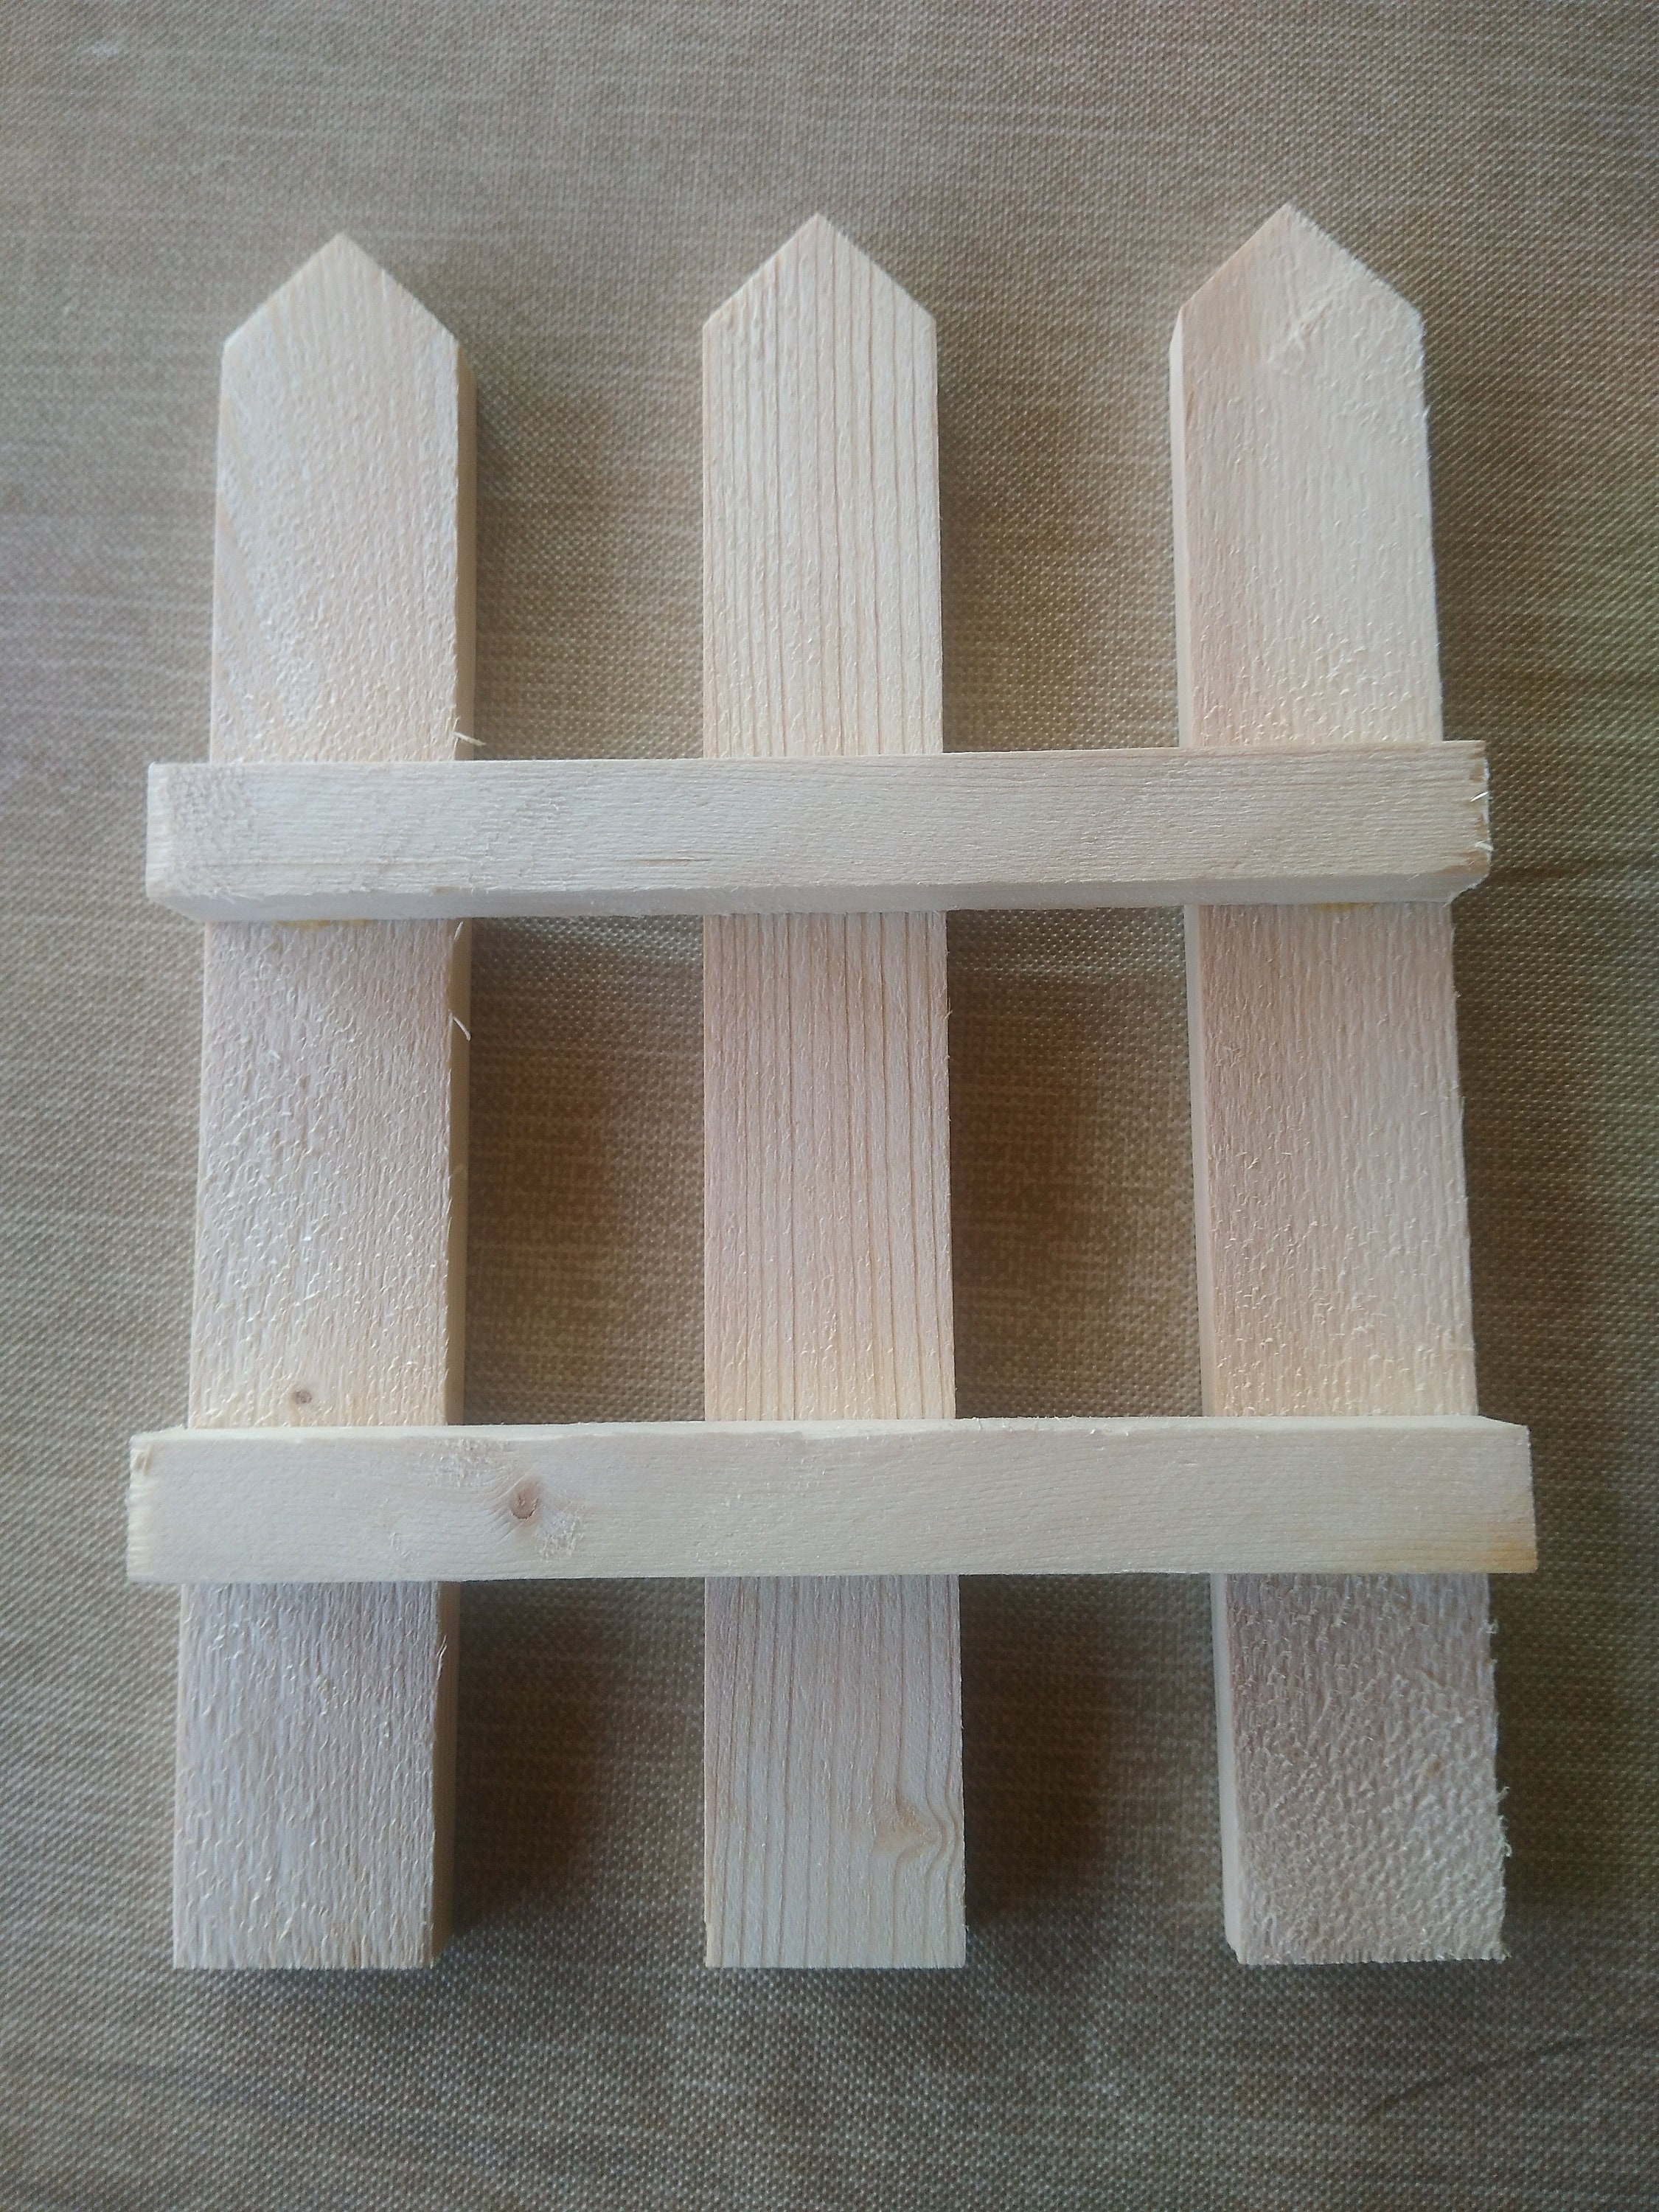 Perfect for Craft Projects Natural Wood Picket Fence 7H x 5W Set of 3 Handmade